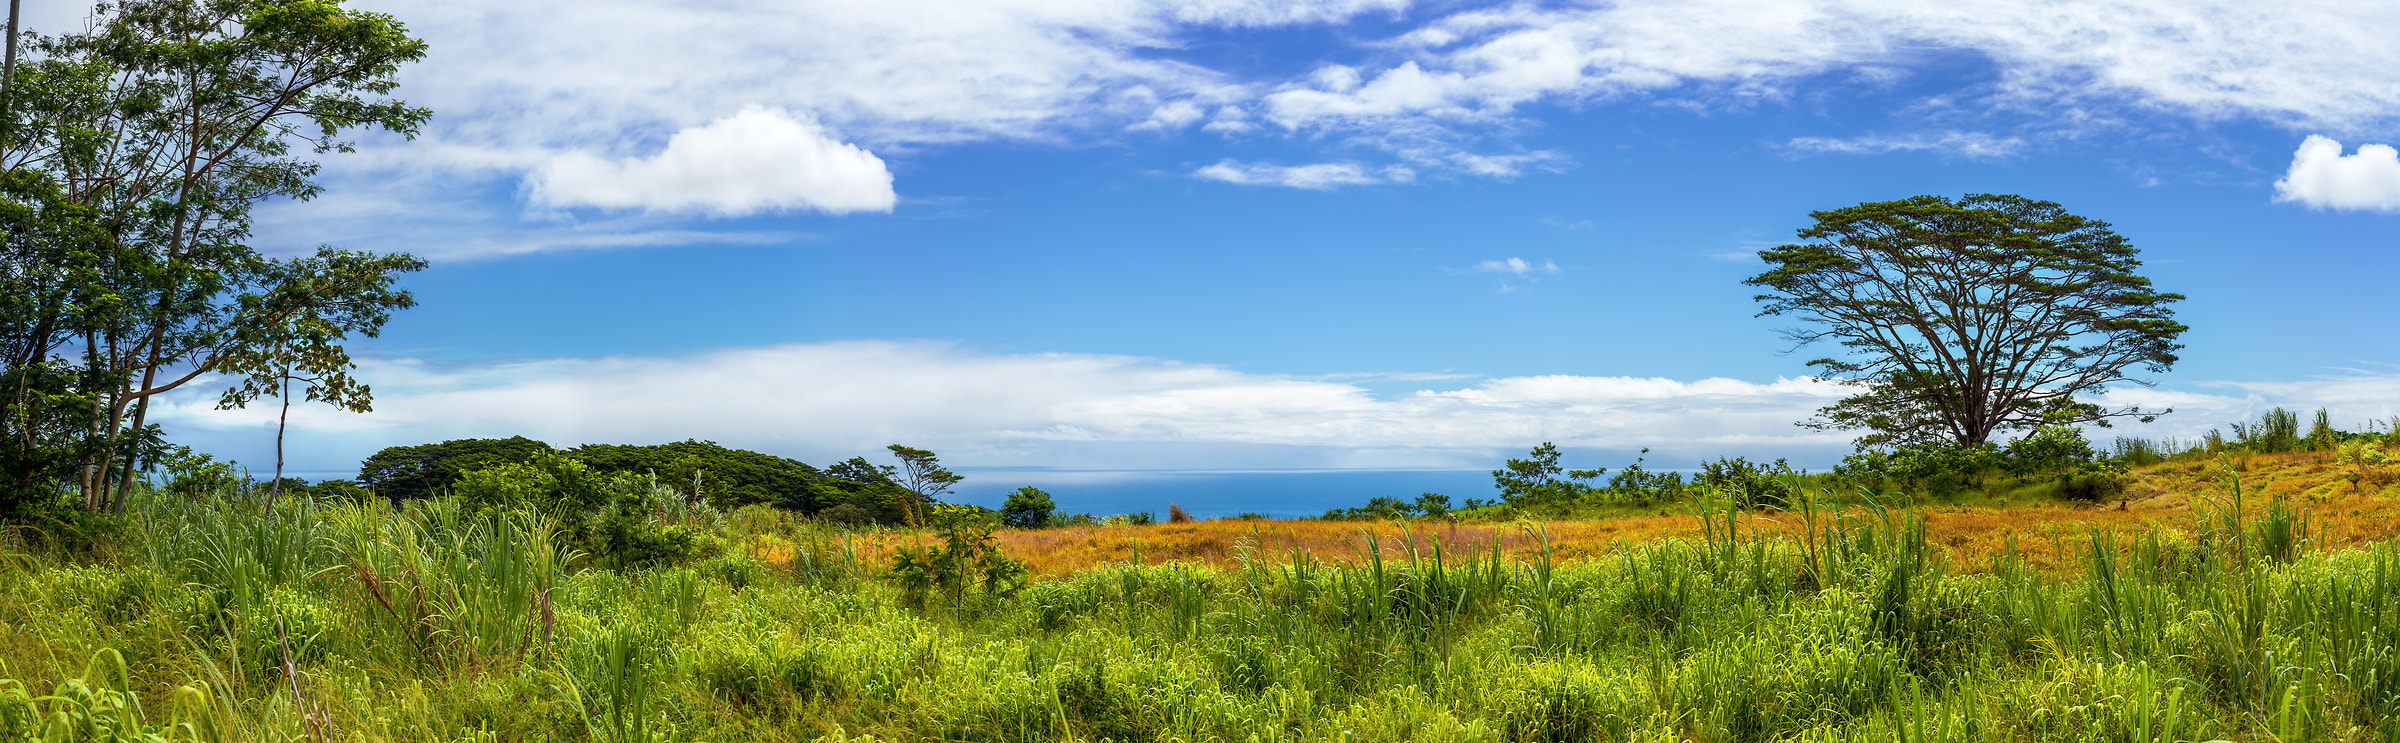 356 megapixels! A very high resolution, large-format VAST photo of a green and blue landscape; panorama photograph created by Jim Tarpo in Honomu, Hawaii